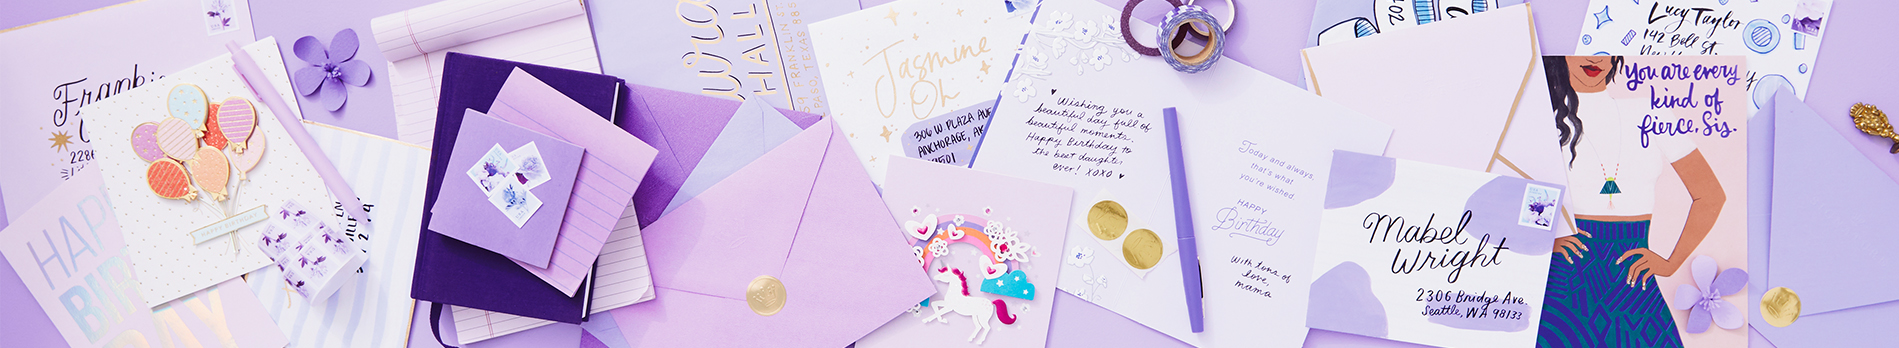 A variety of greeting cards and addressed envelopes in different hues of purple scattered on a tabletop.